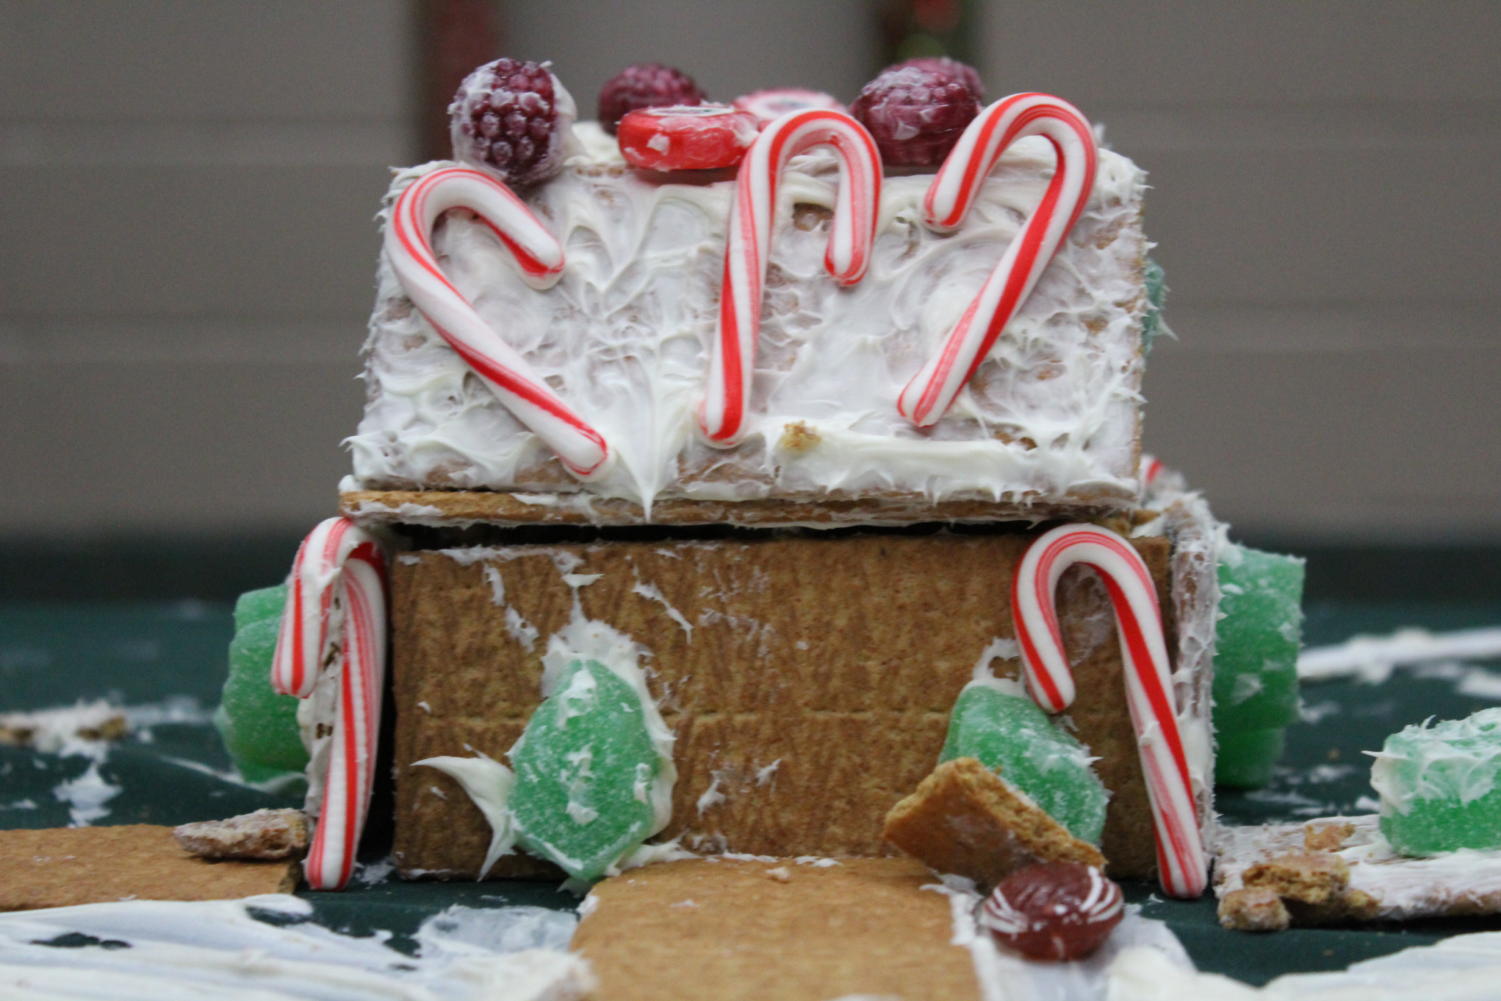 Gallery+of+the+day%3A+Gingerbread+House+and+Candy+Cane+Challenge